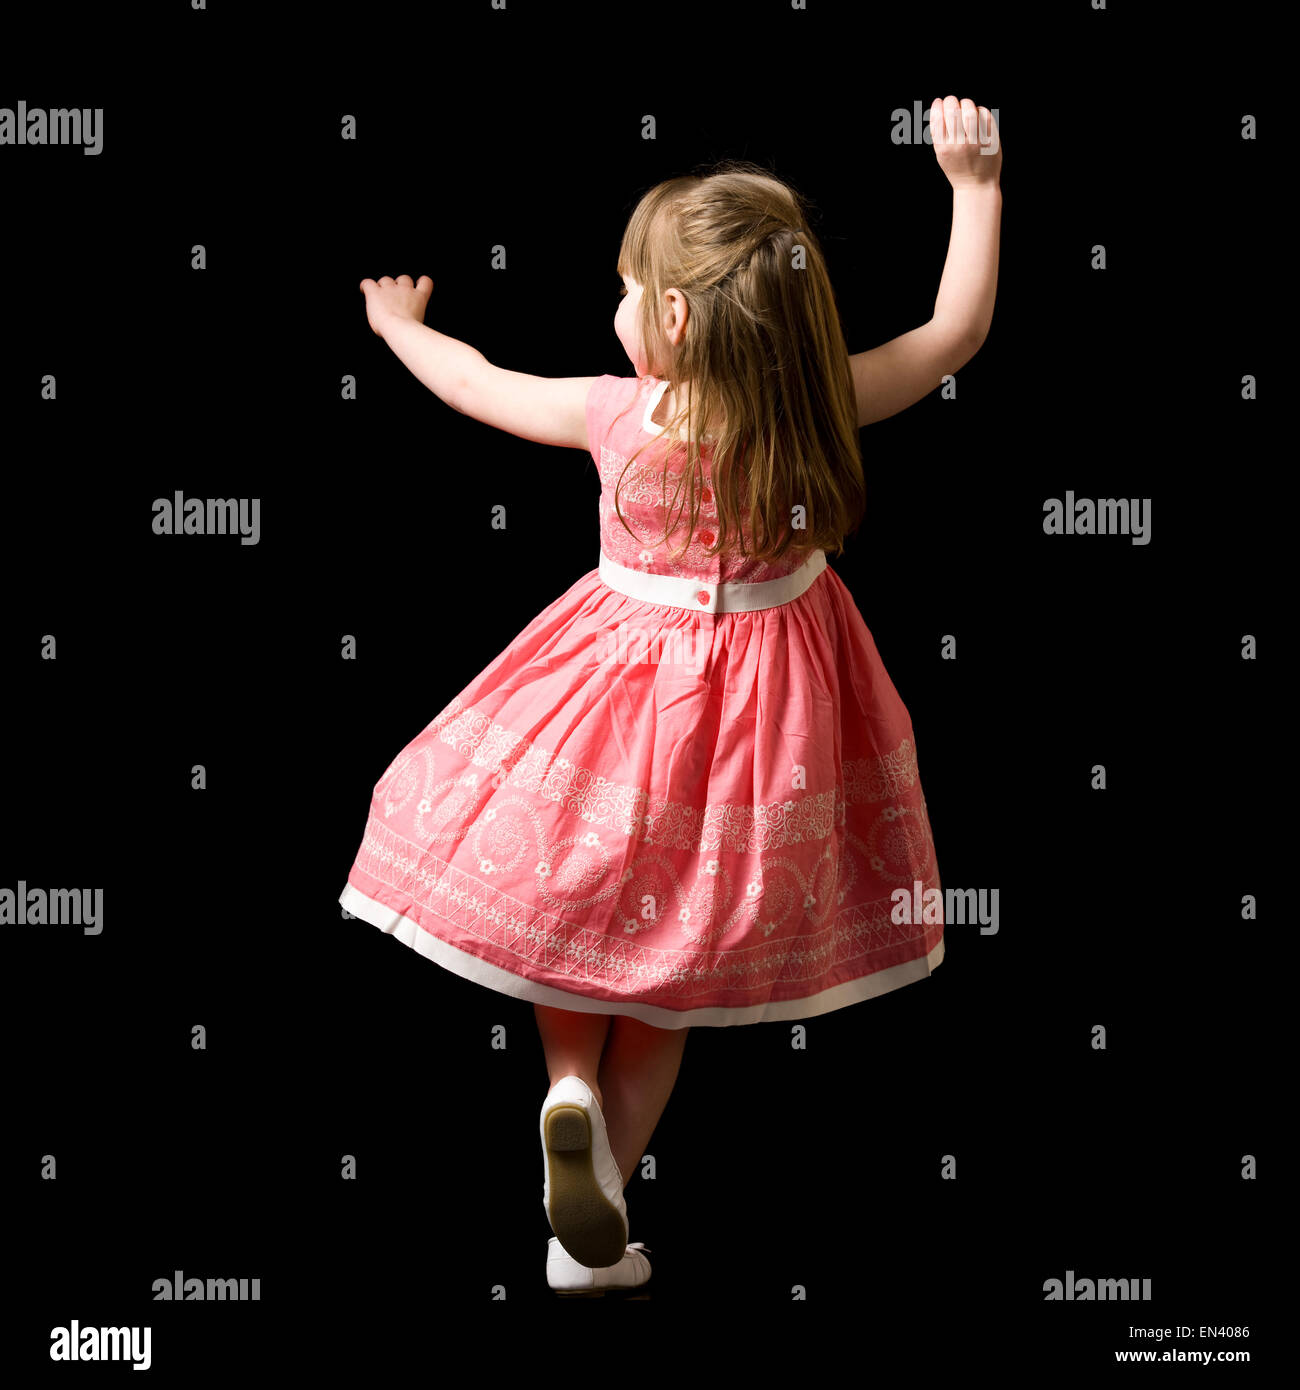 girl dancing in a red dress Stock Photo